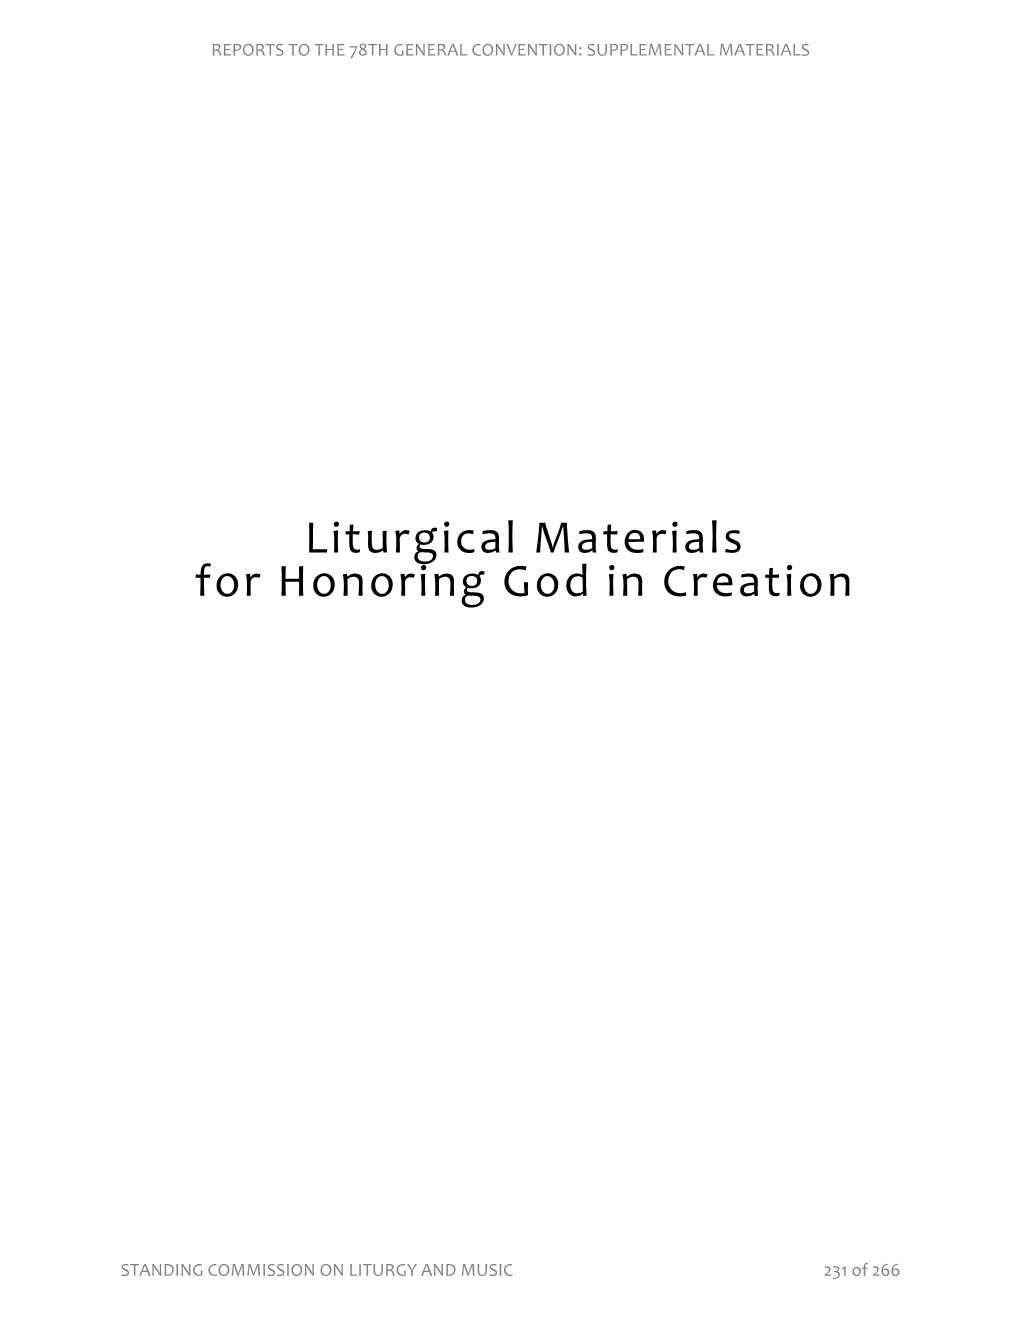 Liturgical Materials for Honoring God in Creation